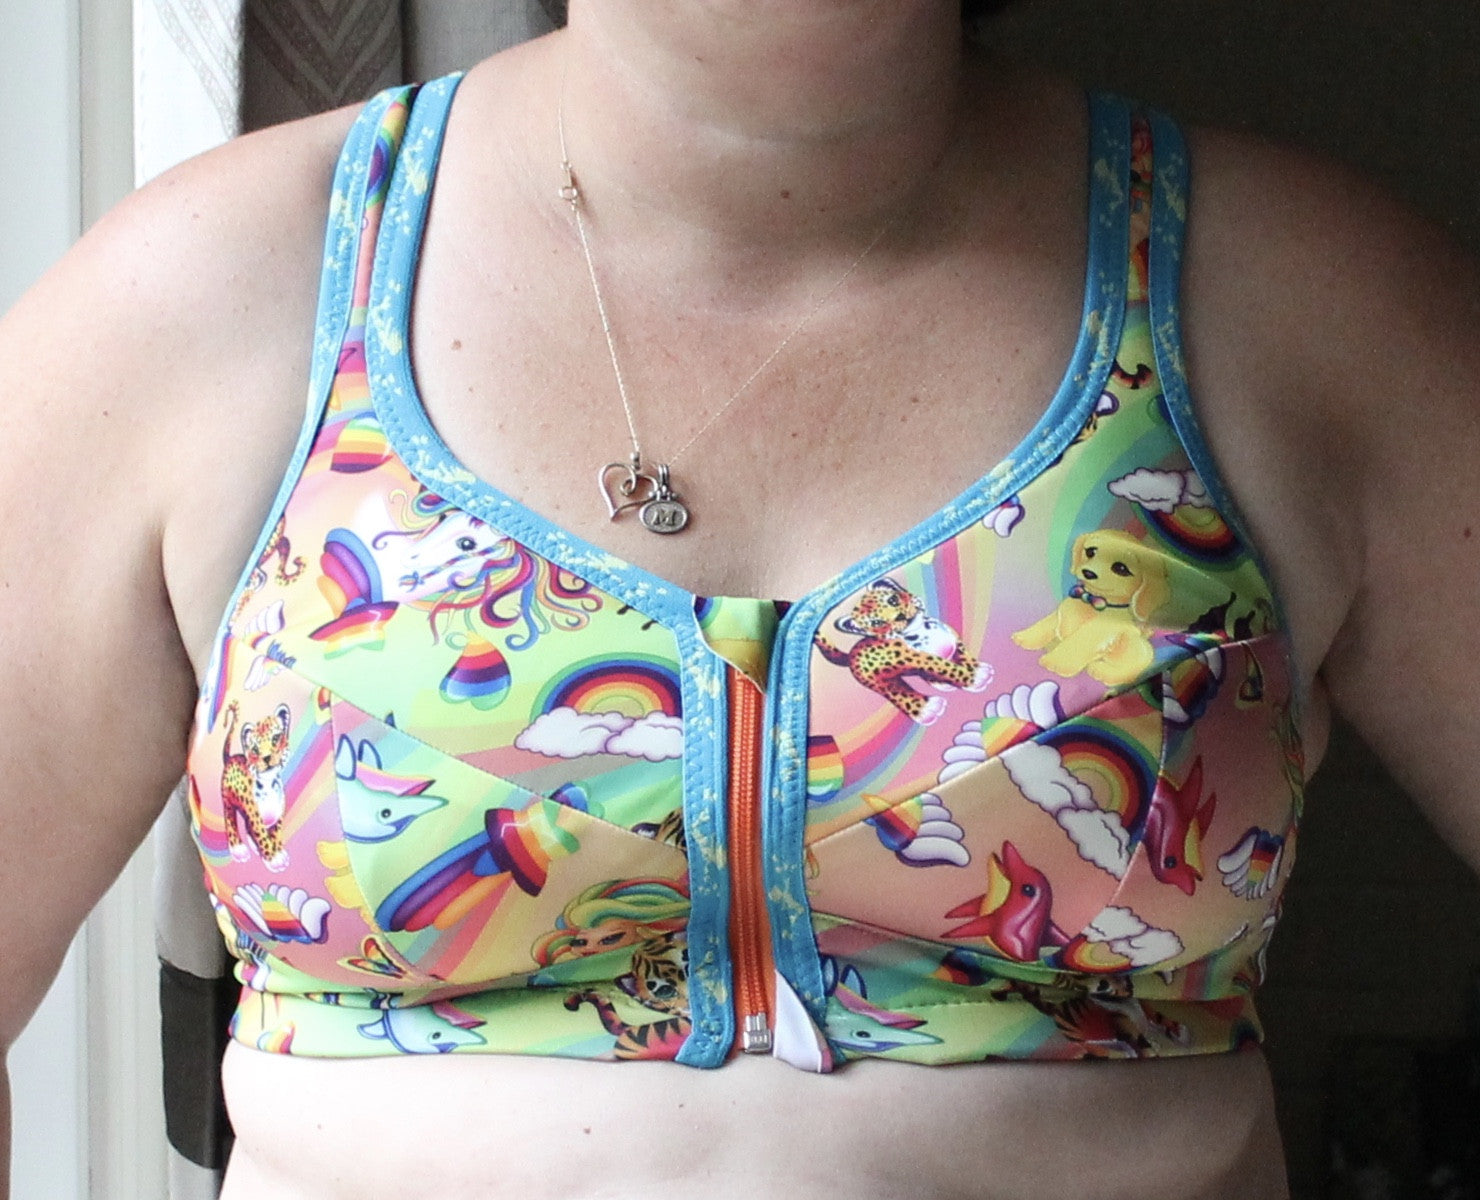 Greenstyle Endurance Sports Bra PDF Sewing Pattern in Band Sizes 34 to 40  and Cups B H -  Denmark